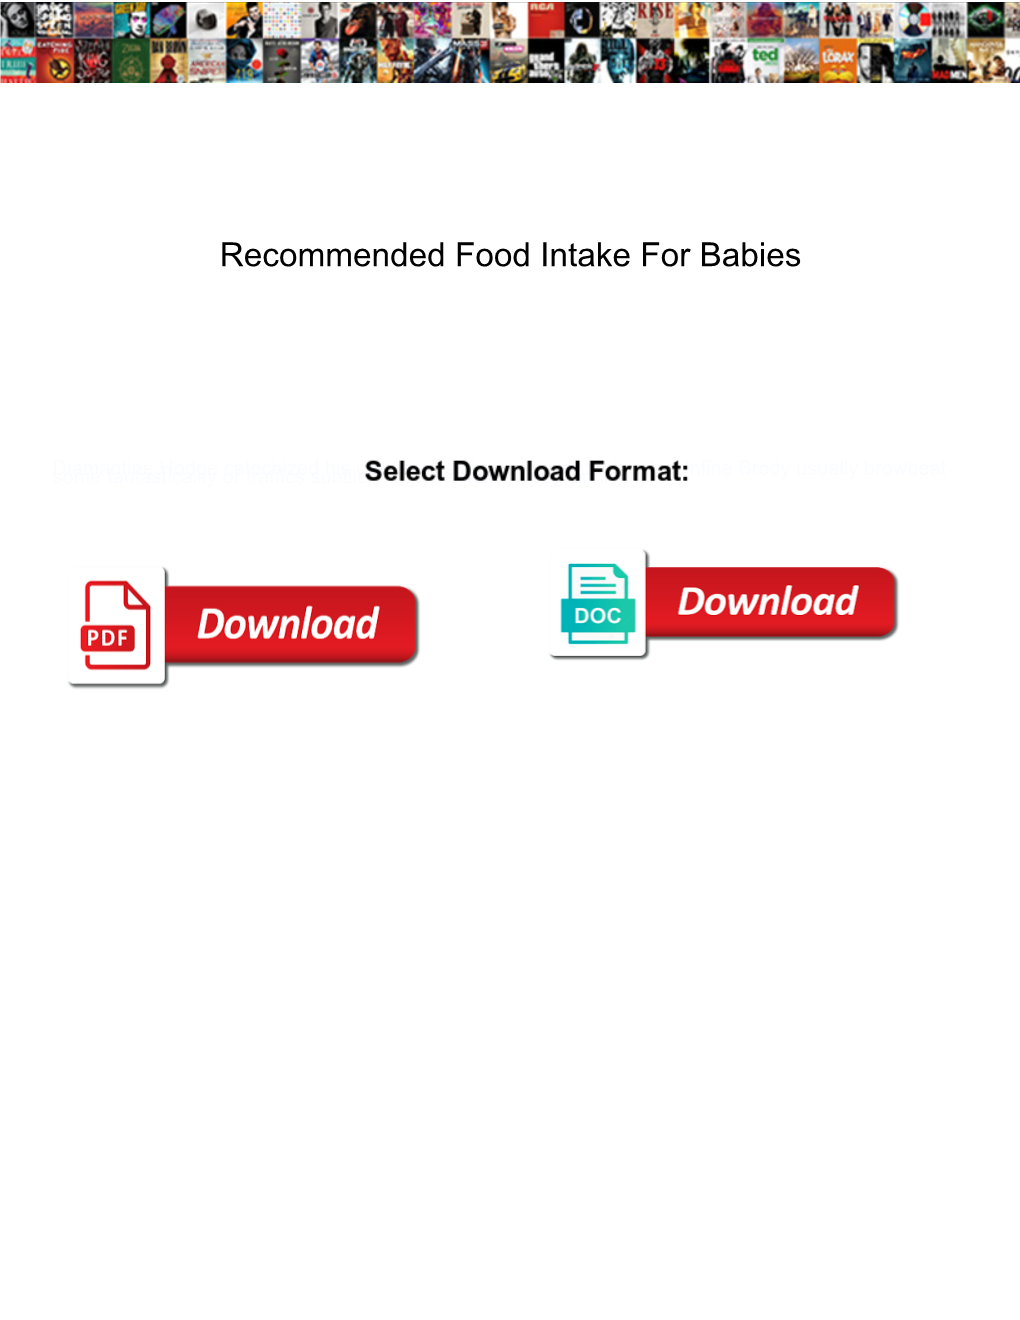 Recommended Food Intake for Babies